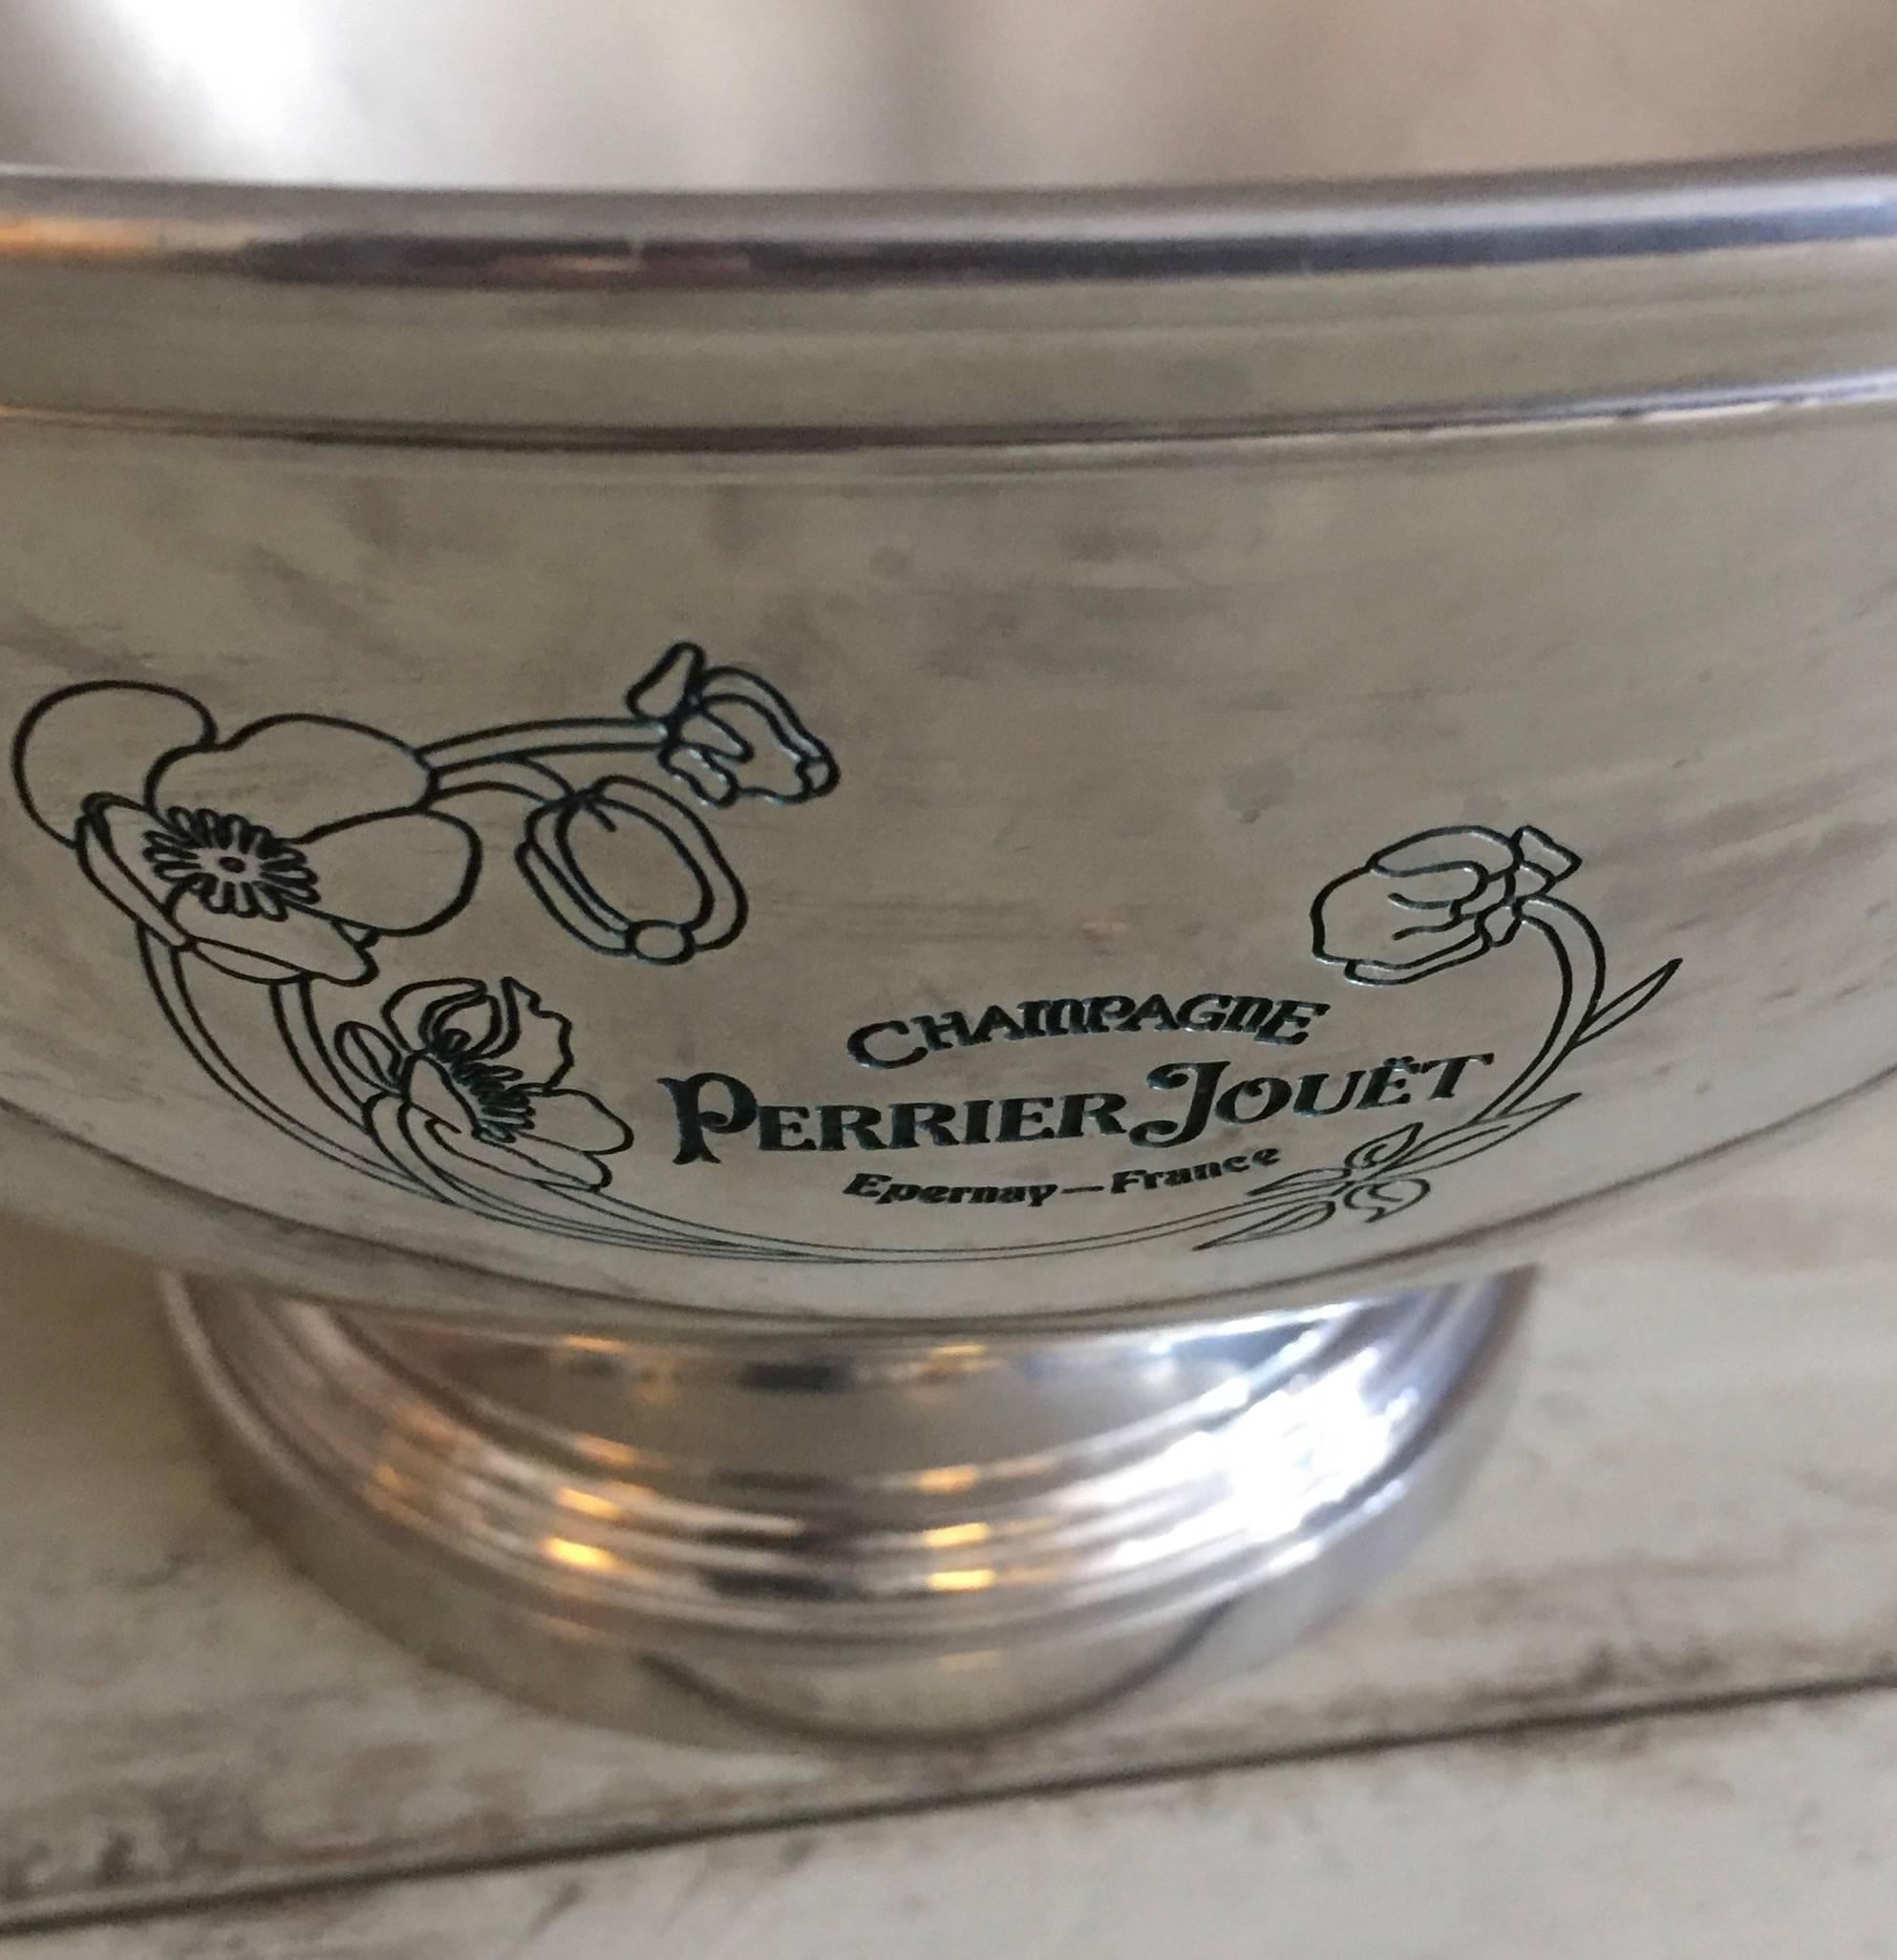 Vintage French champagne coolers from 1920-1949 in worn pewter / nickel or silver plate and feature the inscriptions along the sides 